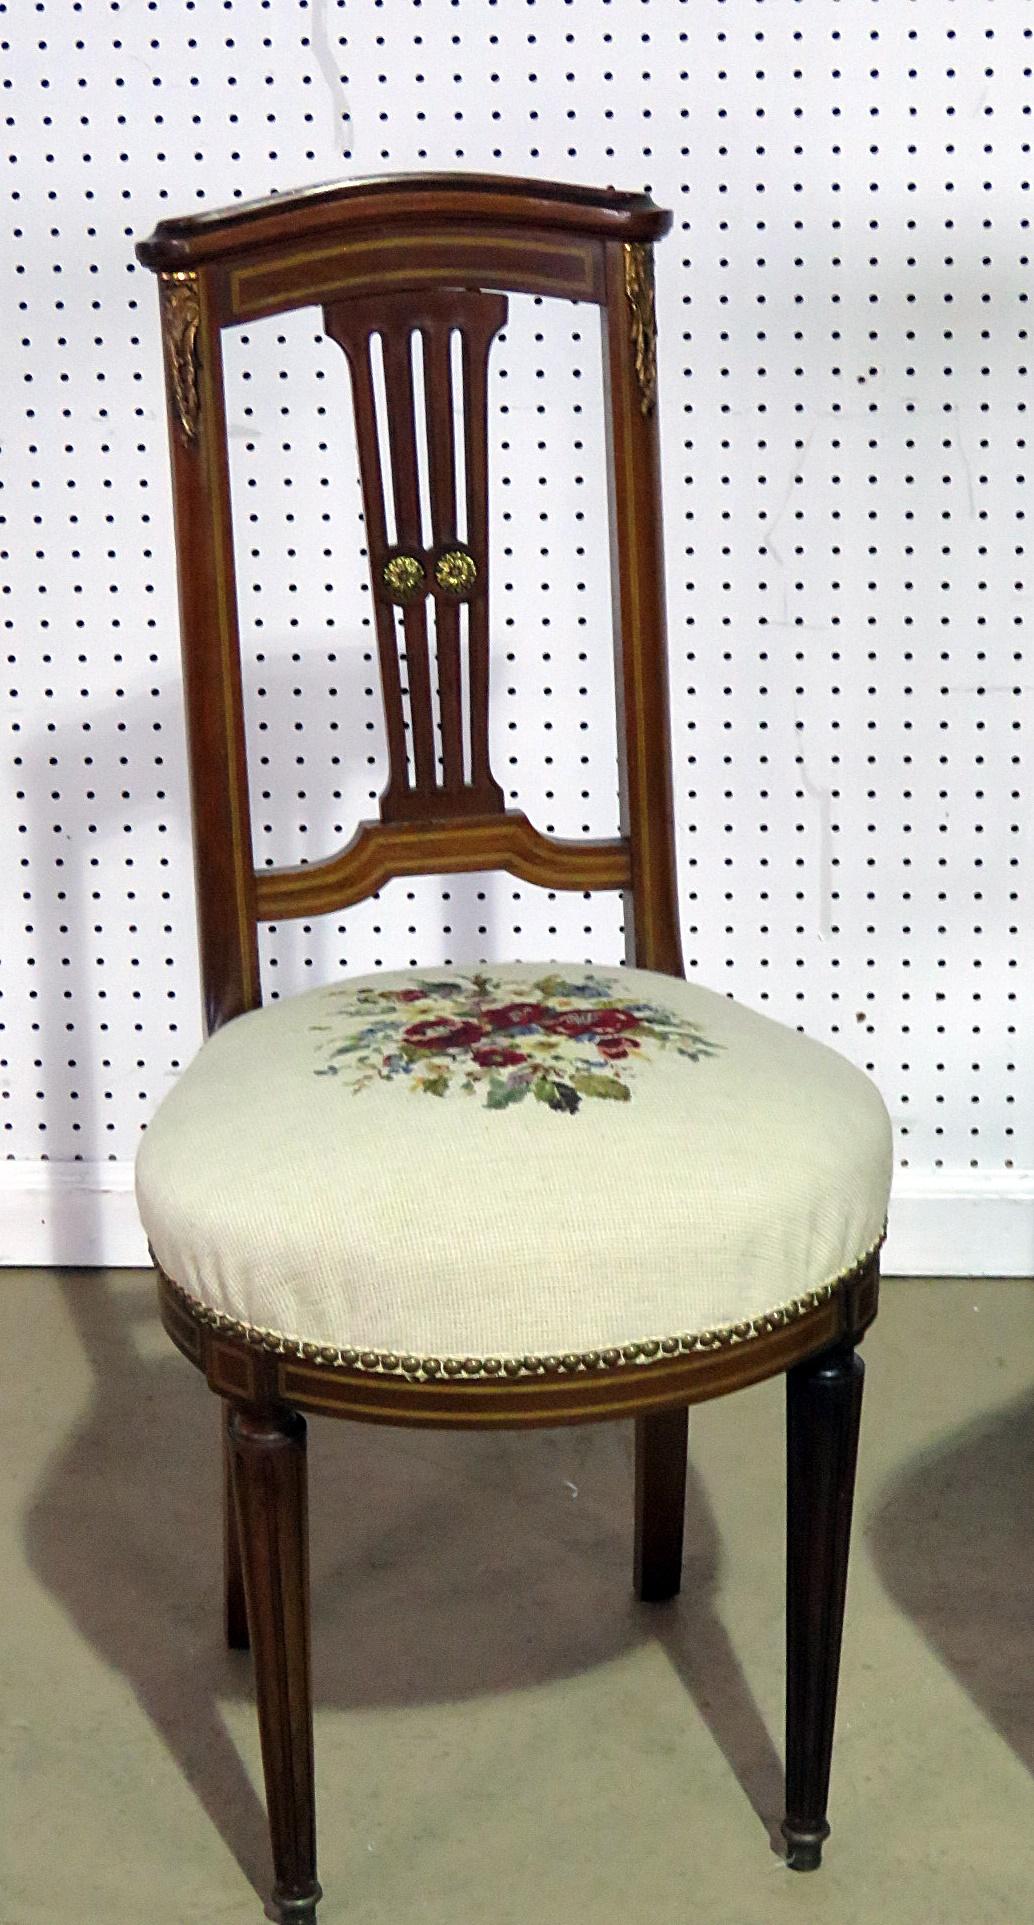 Pair of Directoire style slipper chairs with needle point upholstery, gilt highlights, and nailhead trim.